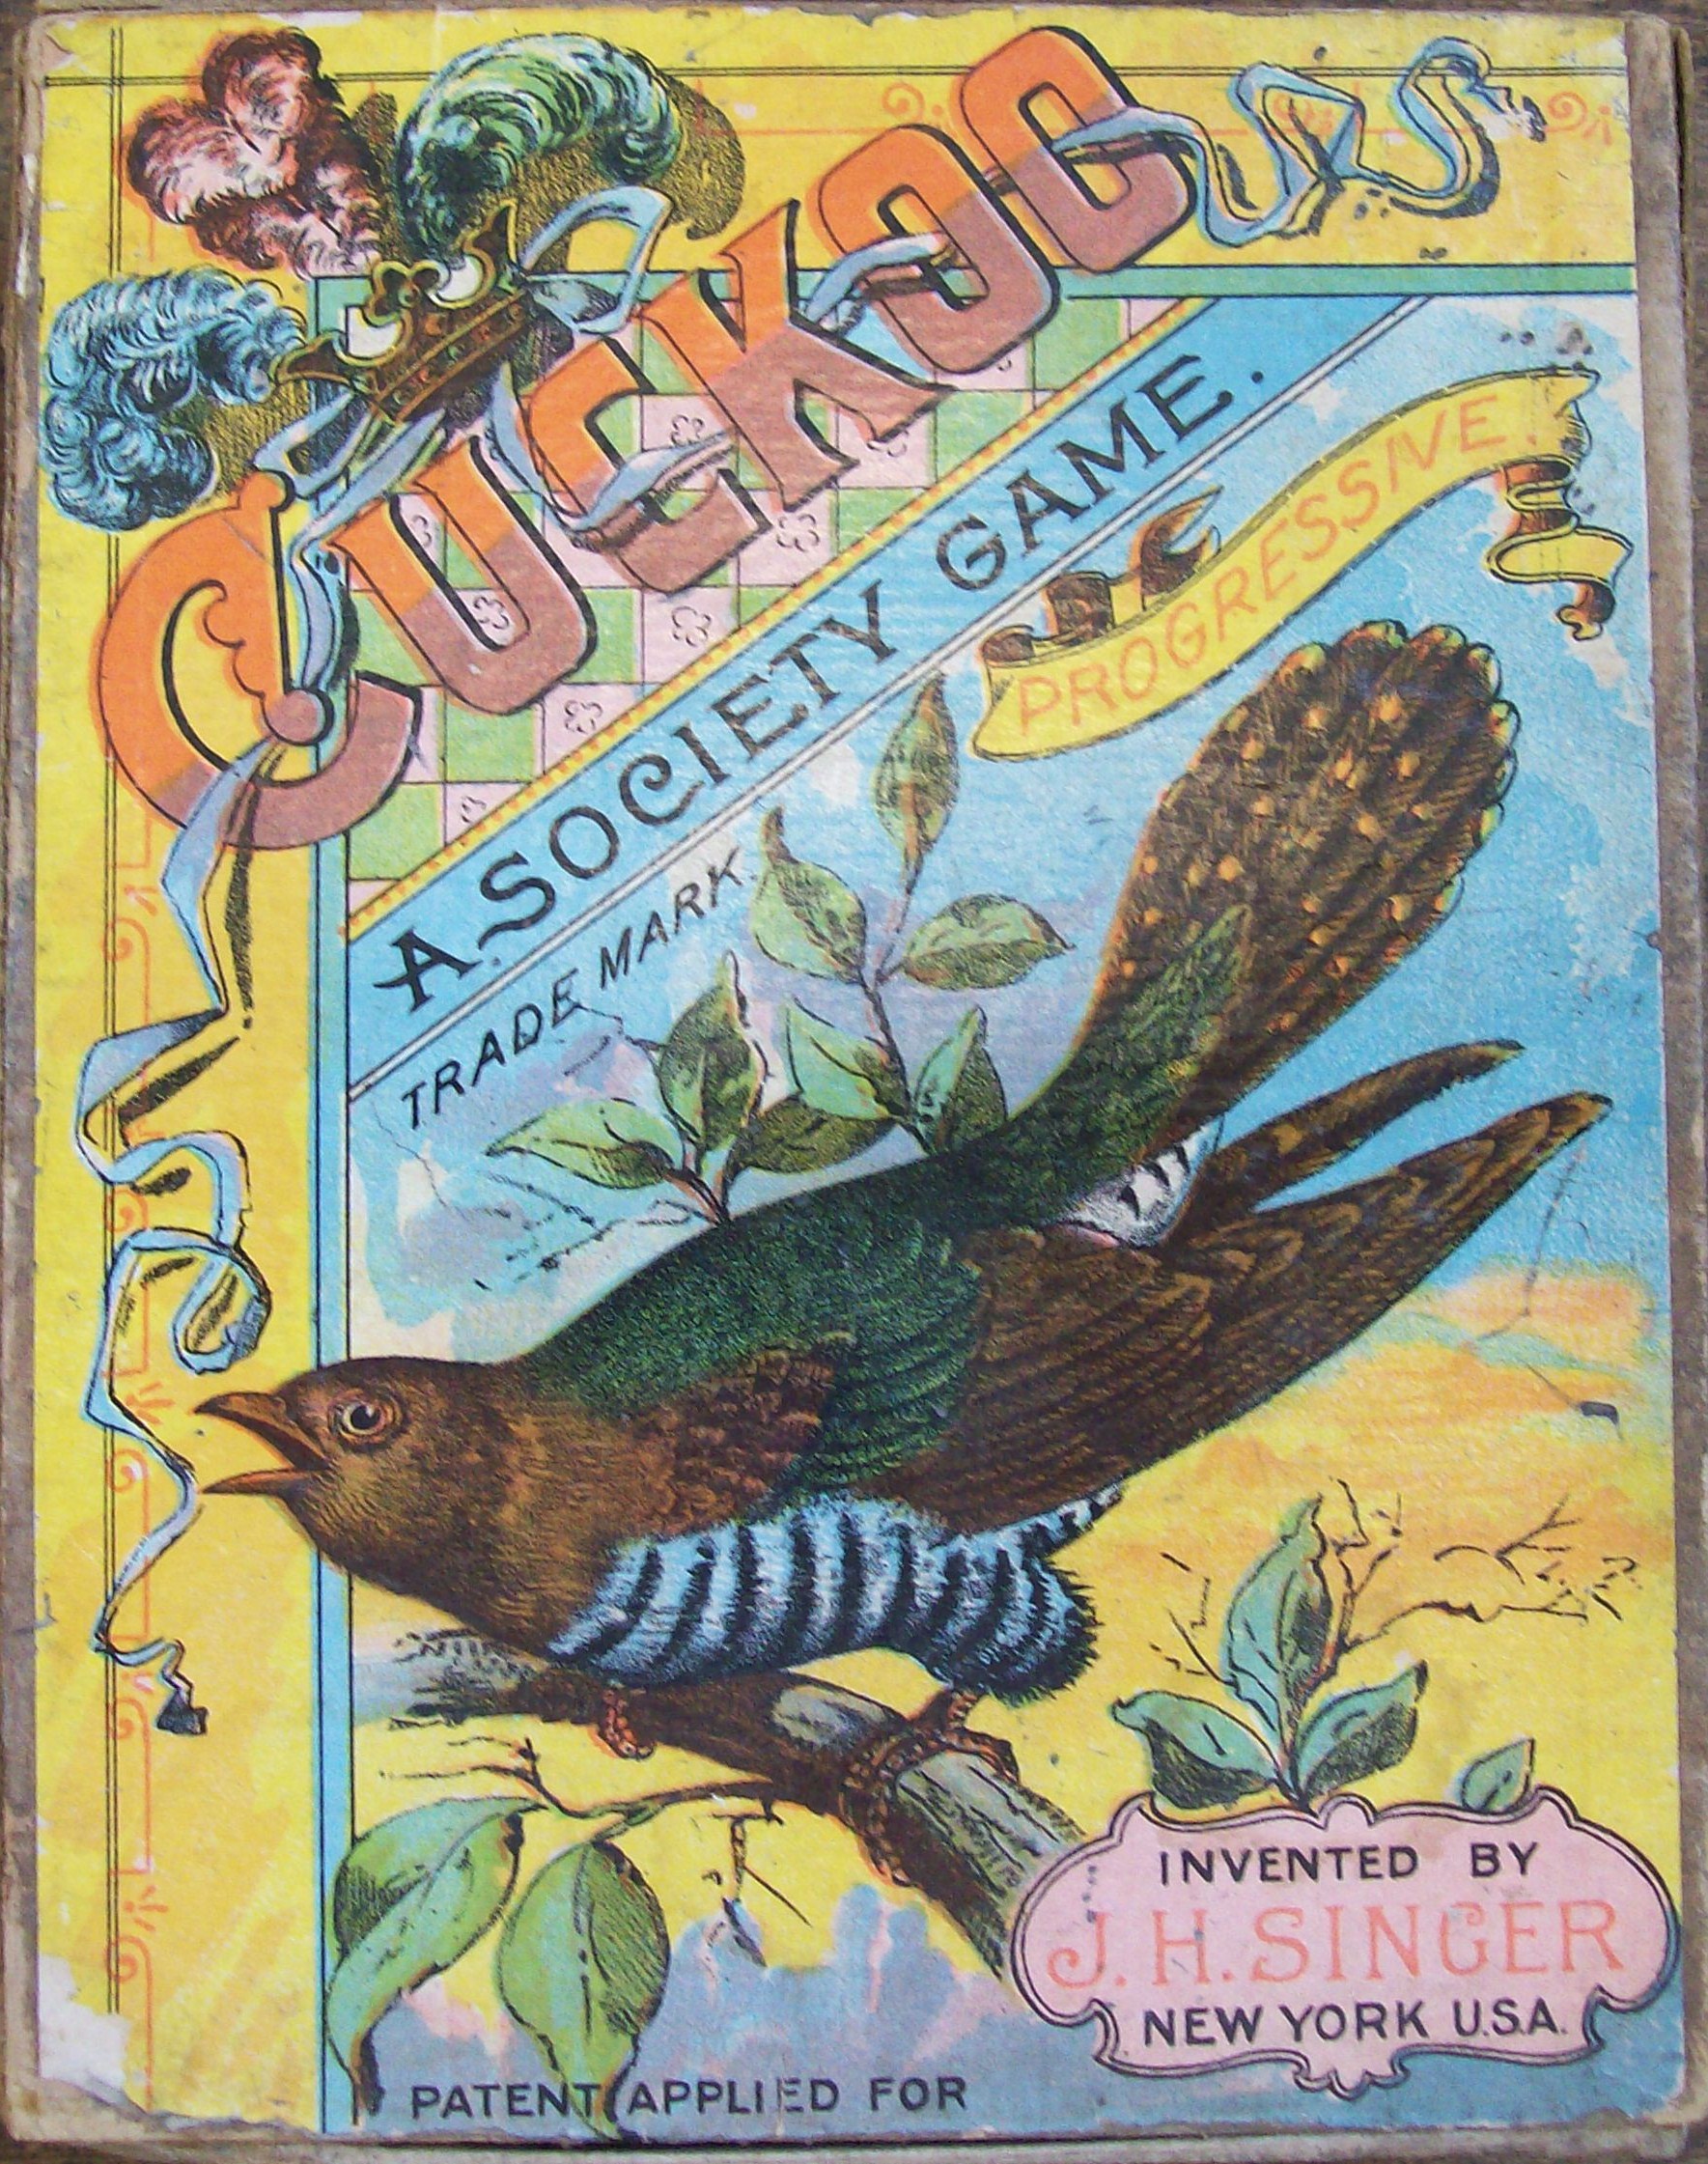 Antique 1891 Game of Cuckoo by J.H. Singer